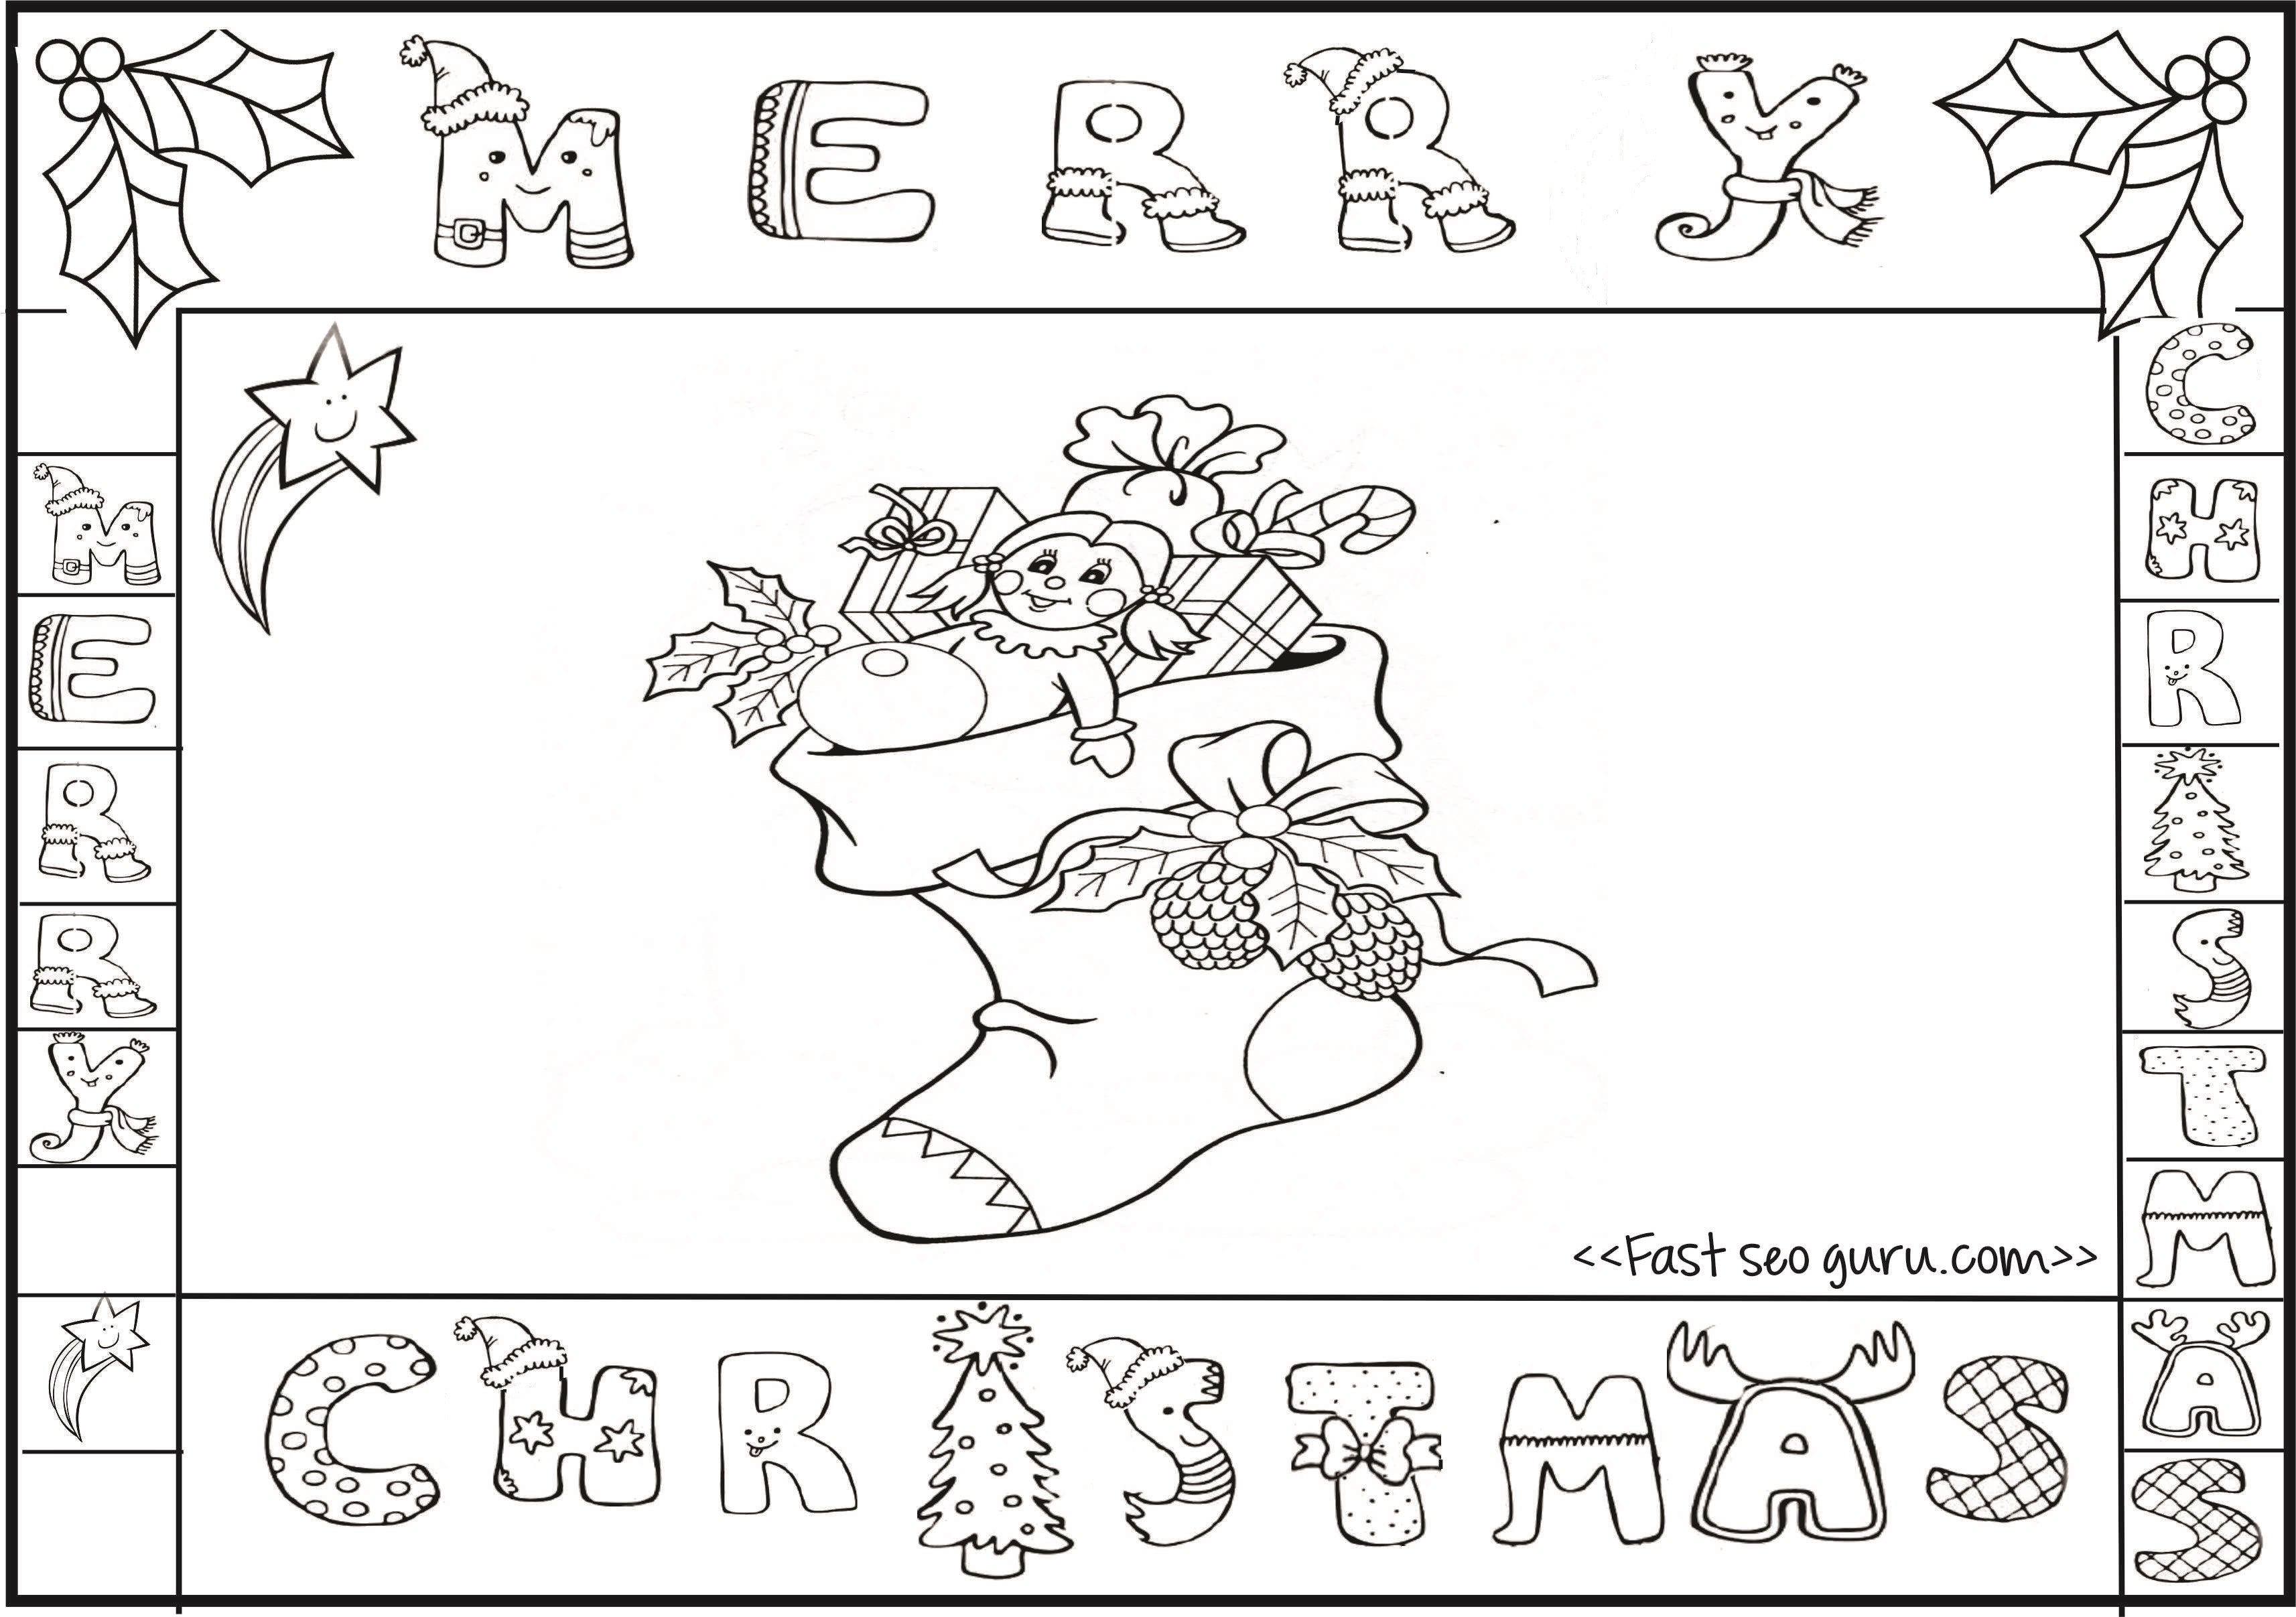 Printable merry christmas stocking colorng pages